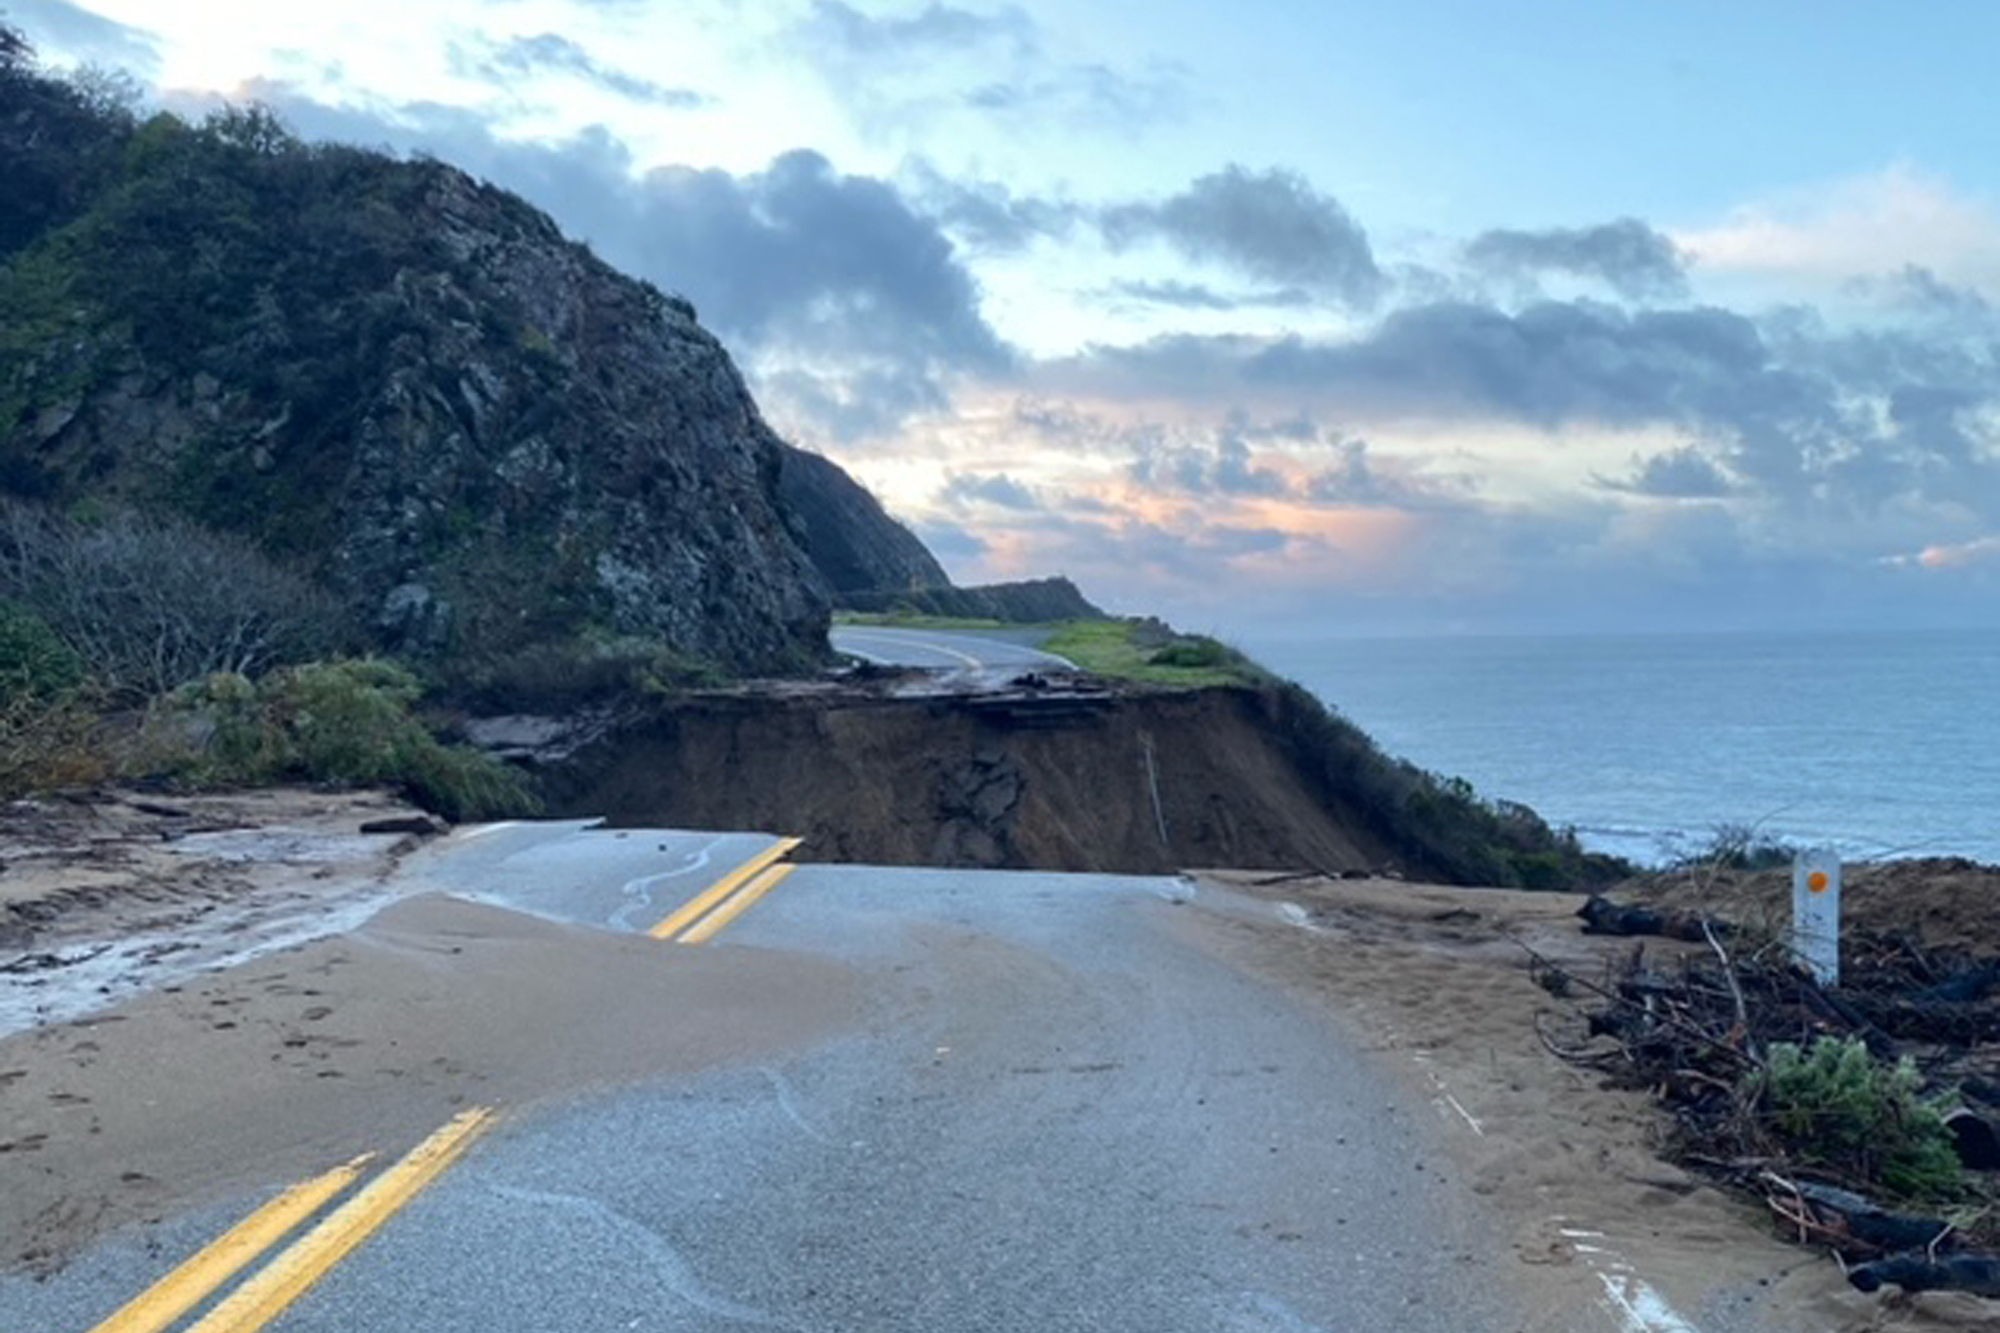 Crews Work to Repair WashedOut Scenic Highway Near Big Sur